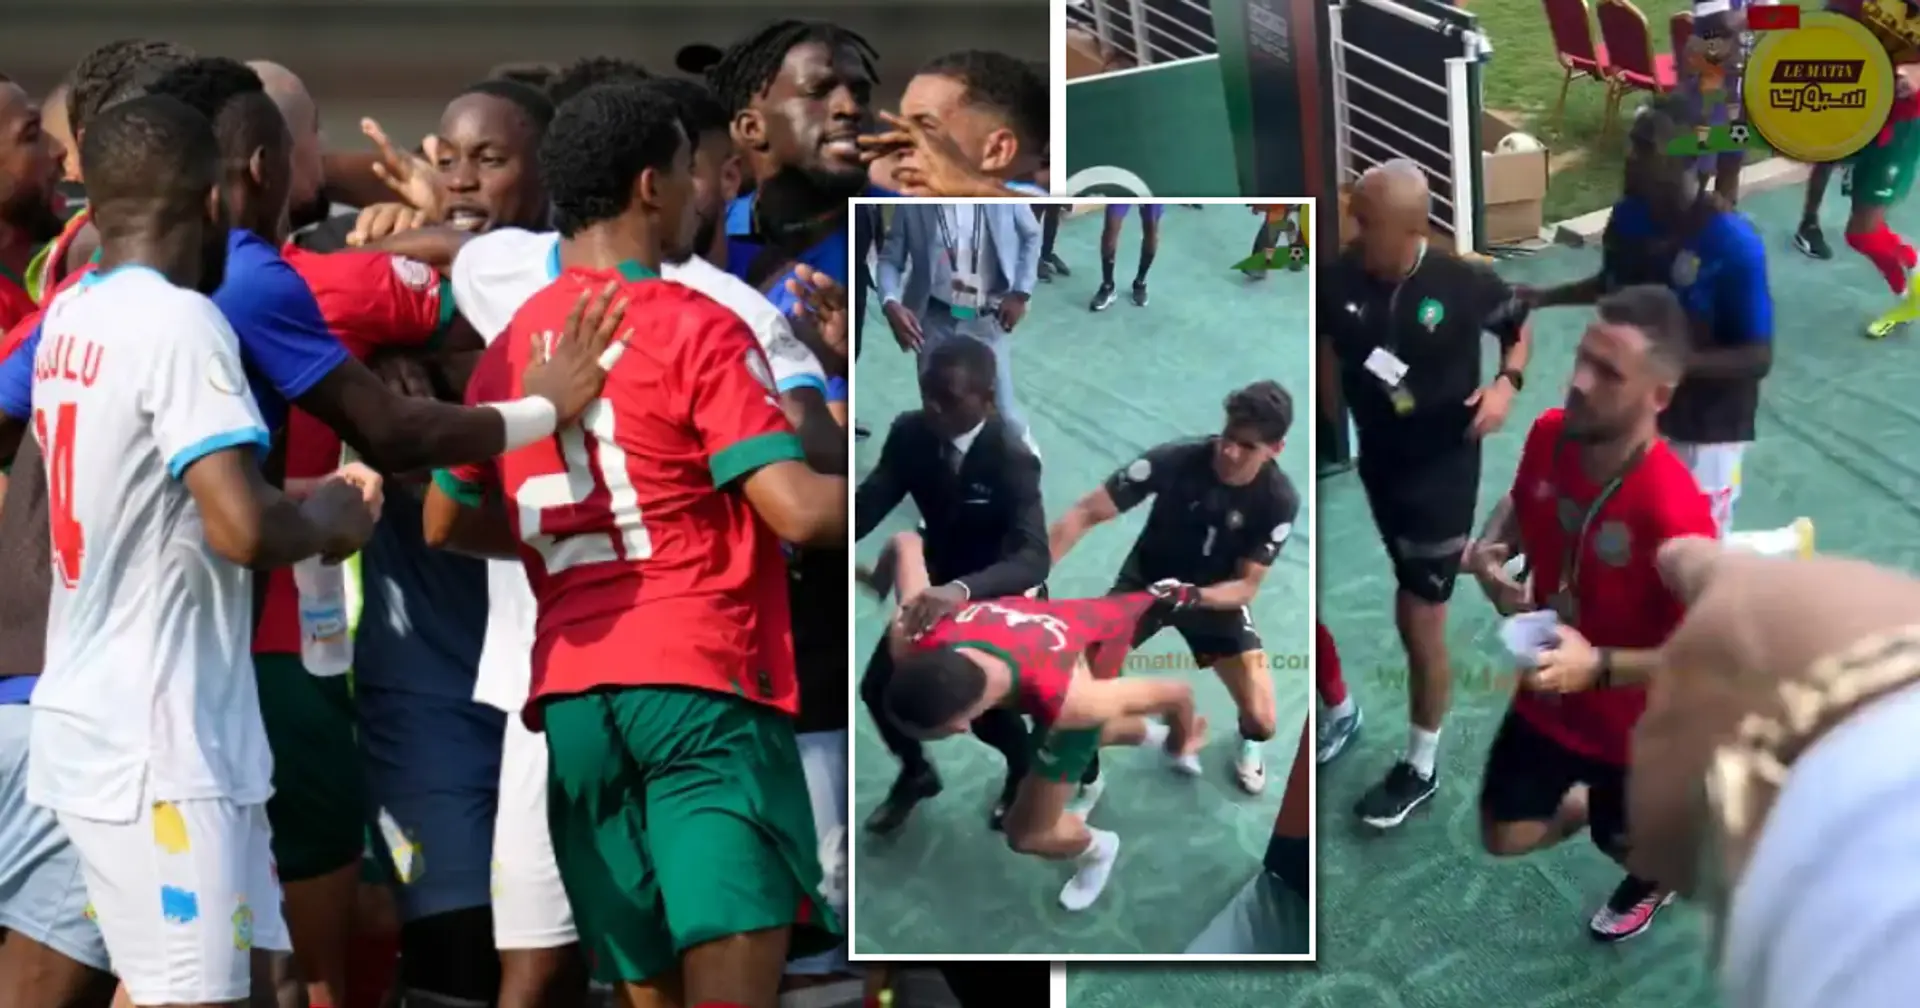 Youssef En-Nesyri chases DR Congo player in the tunnel after a 30-man brawl on the pitch